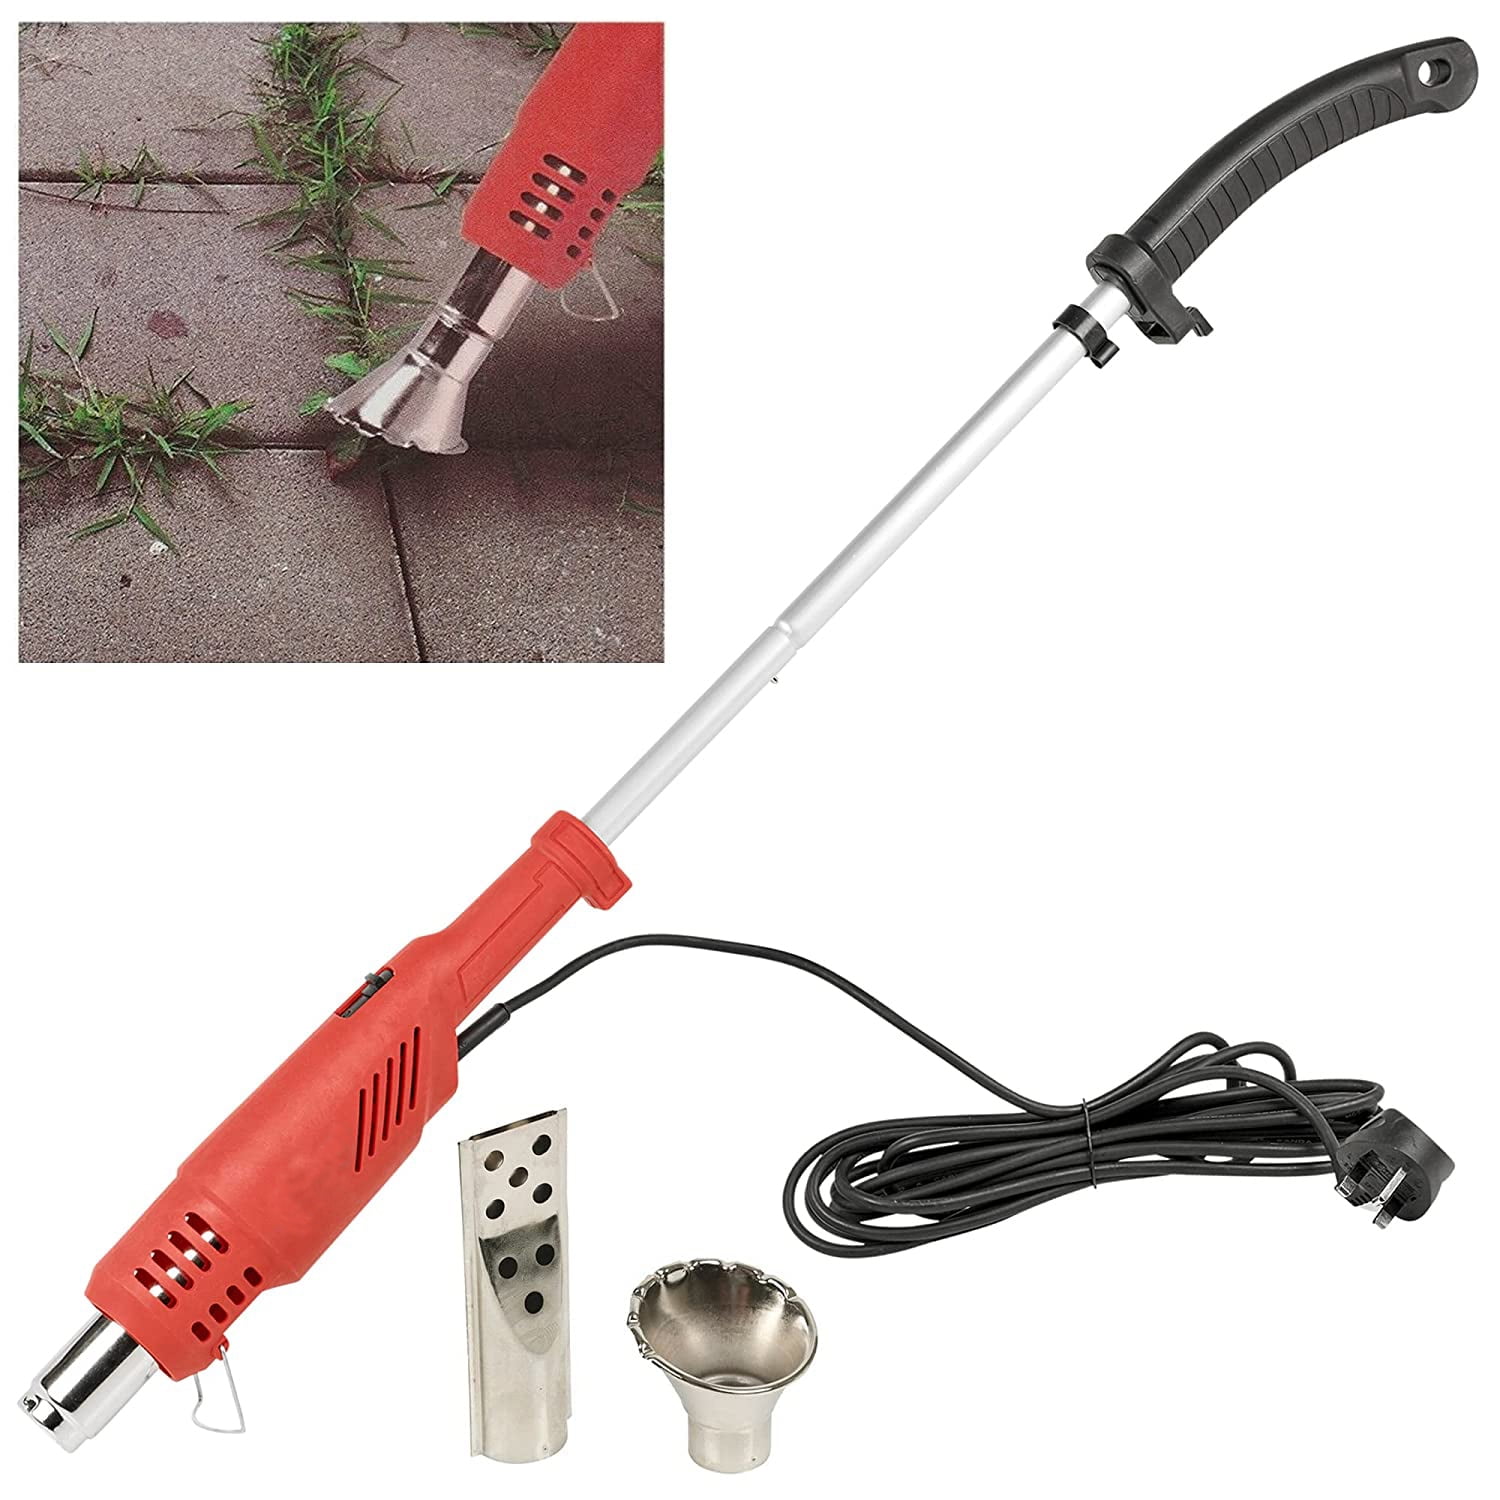 Driveway Environmentally Friendly Weed Burner Orange US plug Up to 650 °C with 3Nozzles and 2M Cable for Garden,Patio BBQ Fan Air Blower 1500W Electric ElectricThermal Weeder 